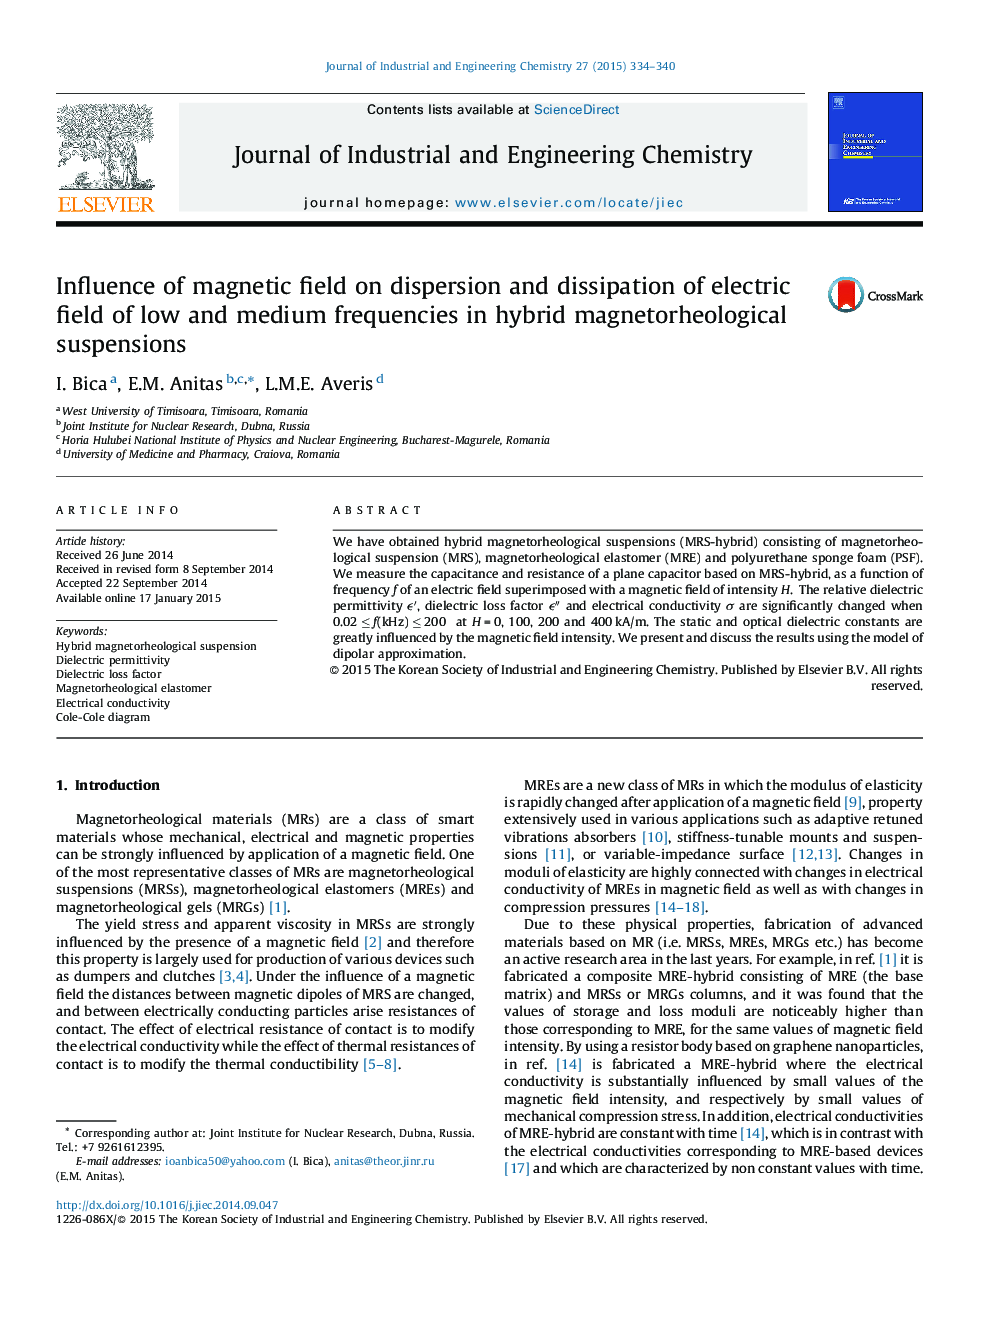 Influence of magnetic field on dispersion and dissipation of electric field of low and medium frequencies in hybrid magnetorheological suspensions